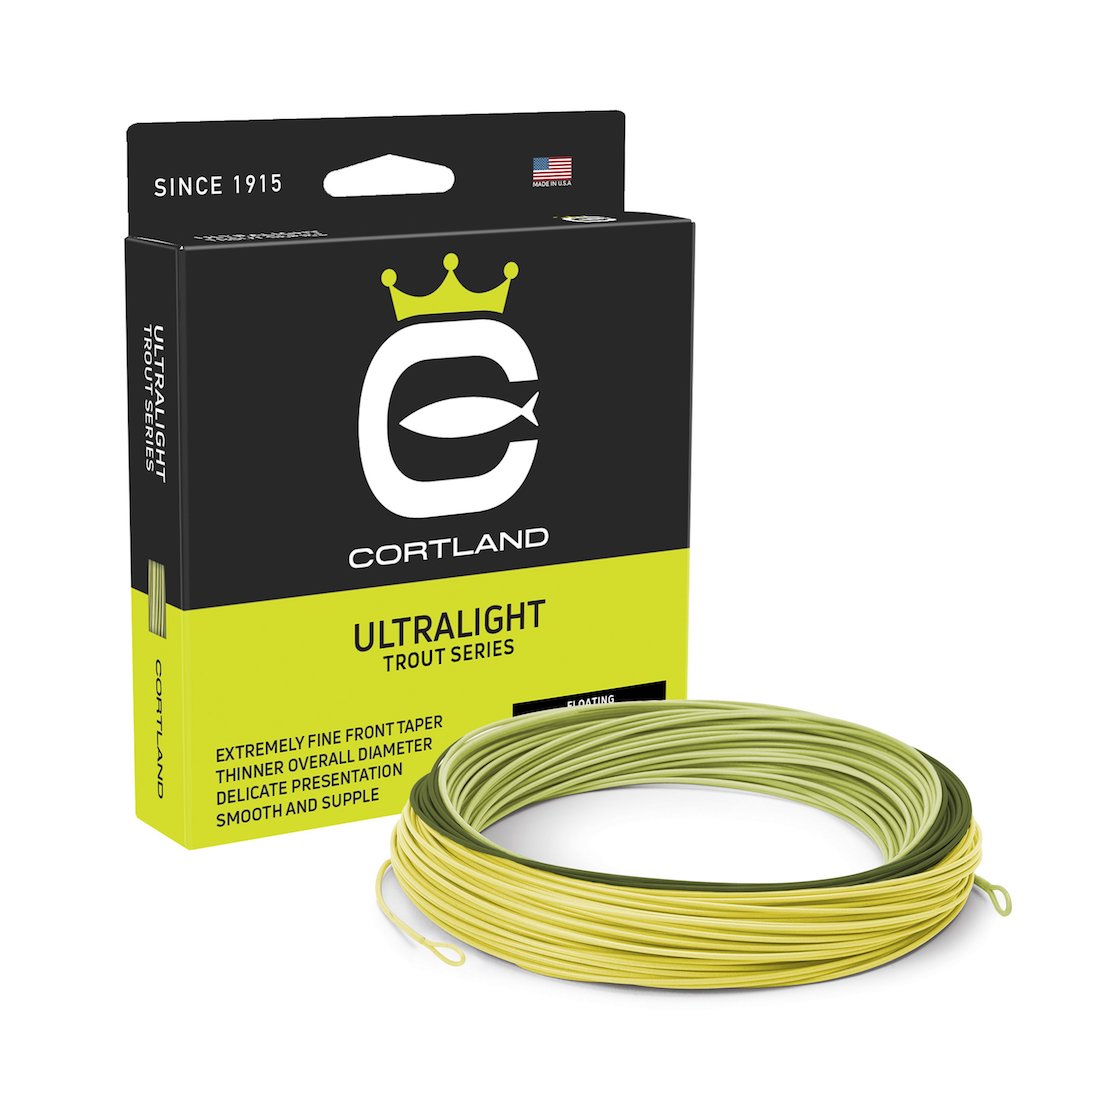 35% OFF Hatch Saltwater Floating Fly Lines 11 or 12 Weight 